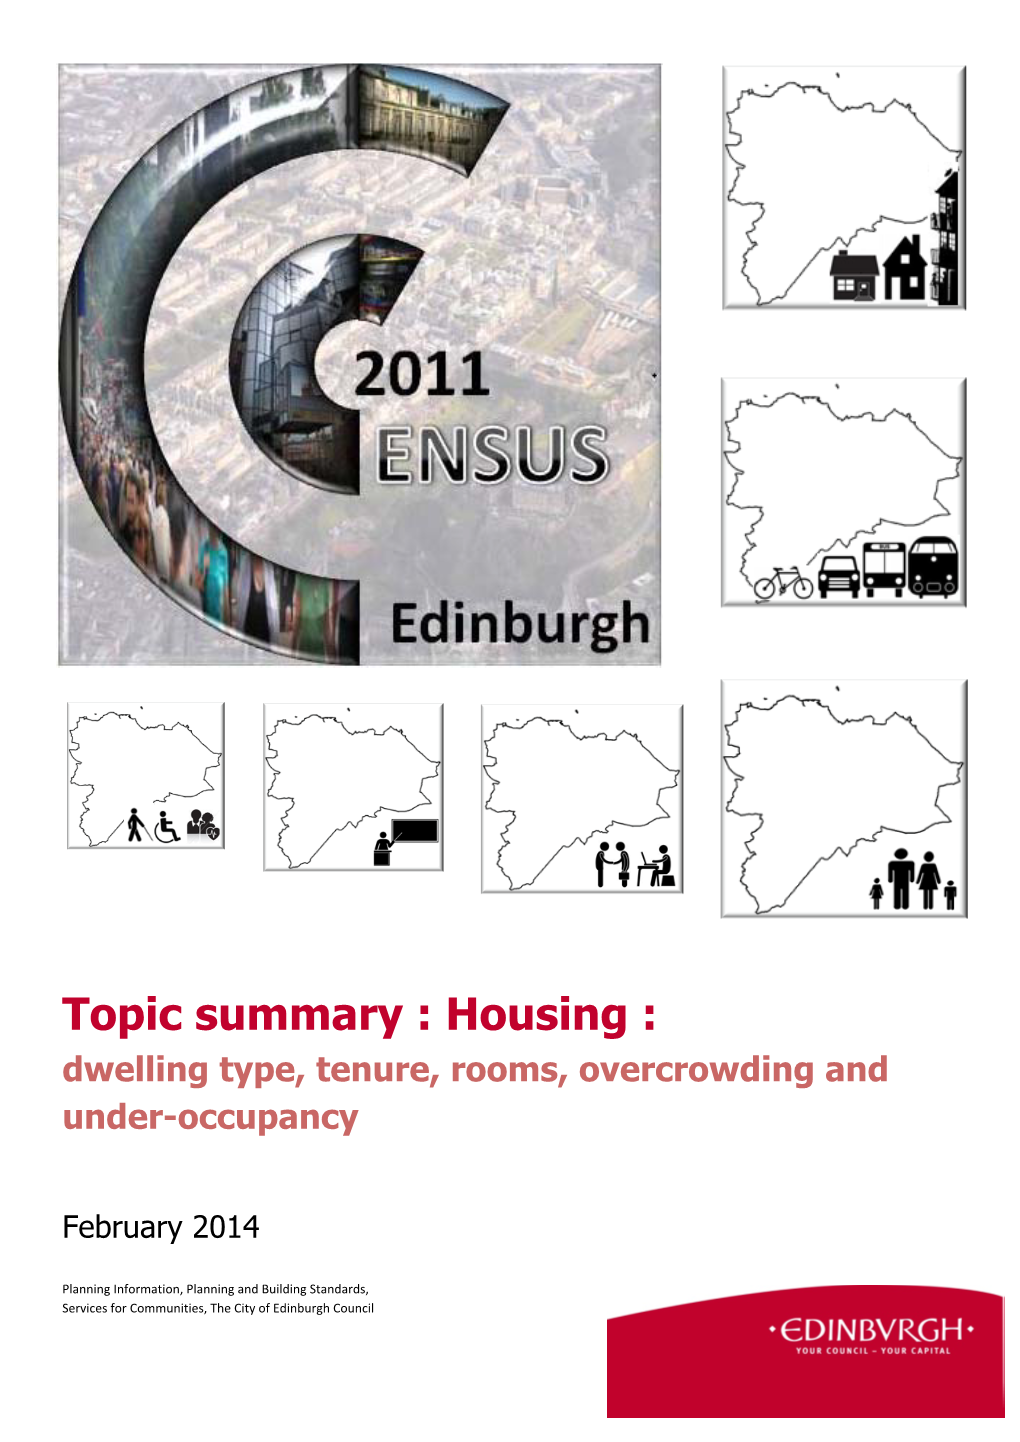 Topic Summary : Housing : Dwelling Type, Tenure, Rooms, Overcrowding and Under-Occupancy